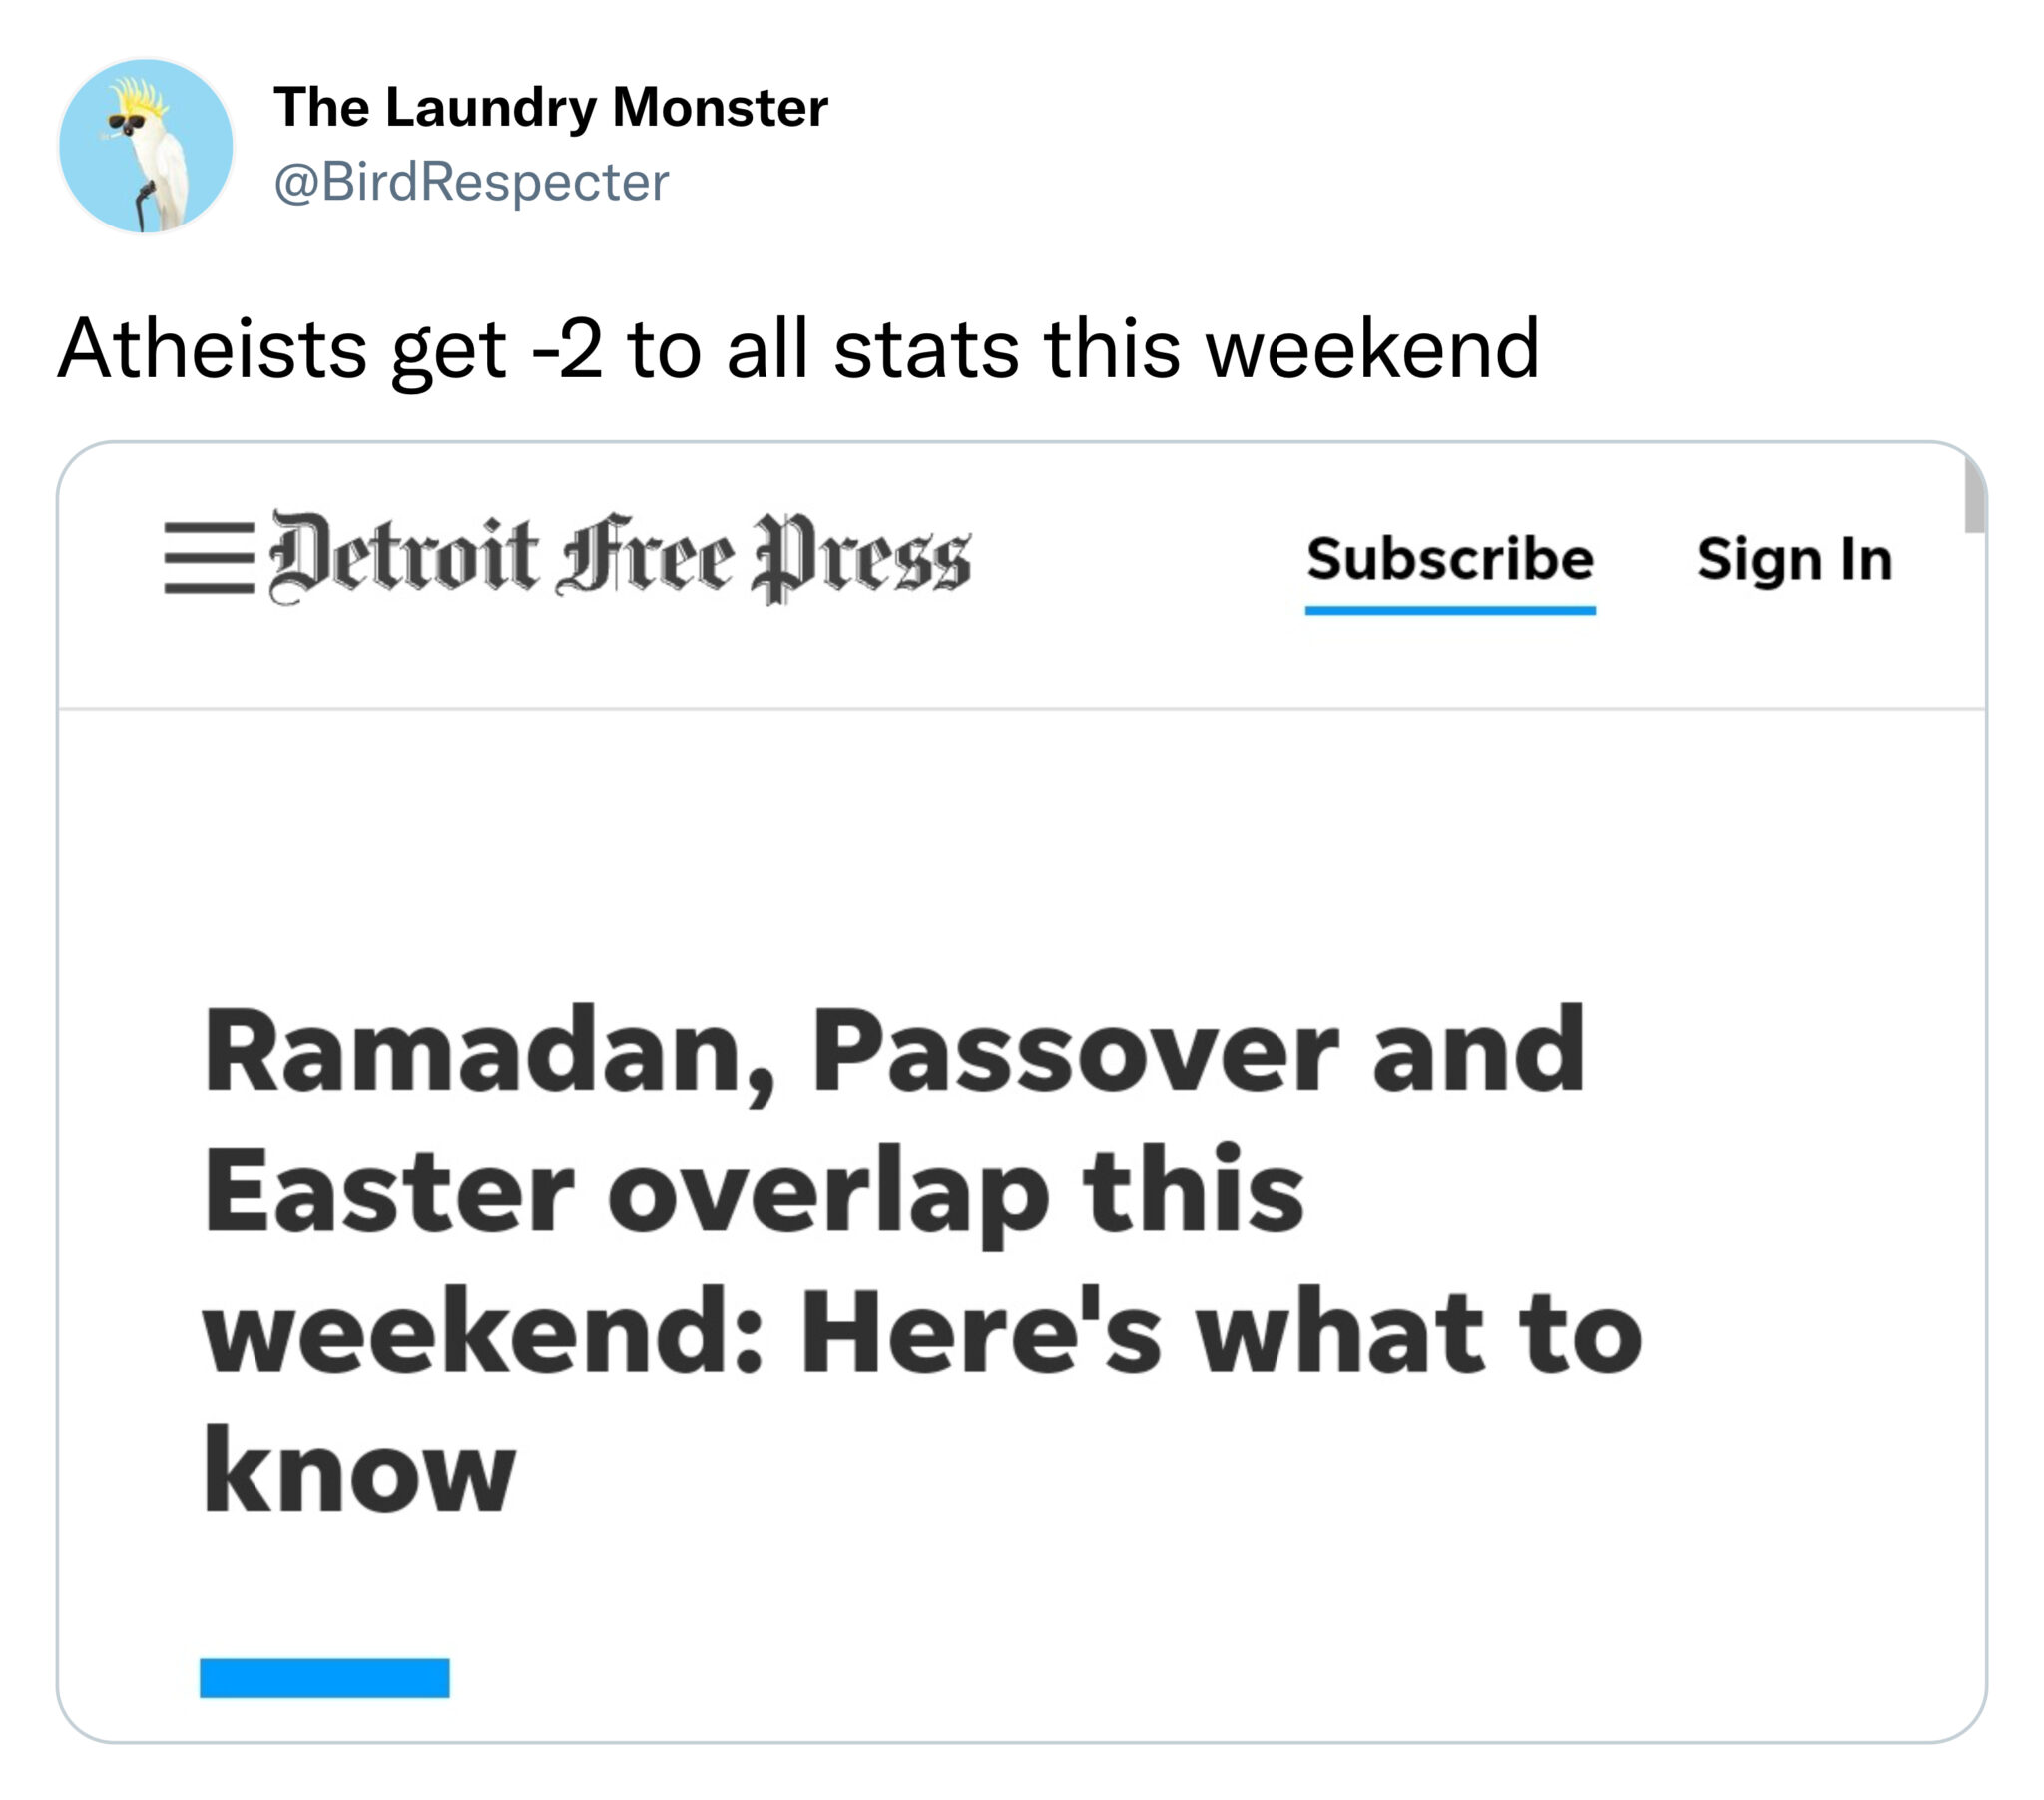 funny tweets - paper - The Laundry Monster Respecter Atheists get 2 to all stats this weekend Detroit Free Press Subscribe Sign In Ramadan, Passover and Easter overlap this weekend Here's what to know